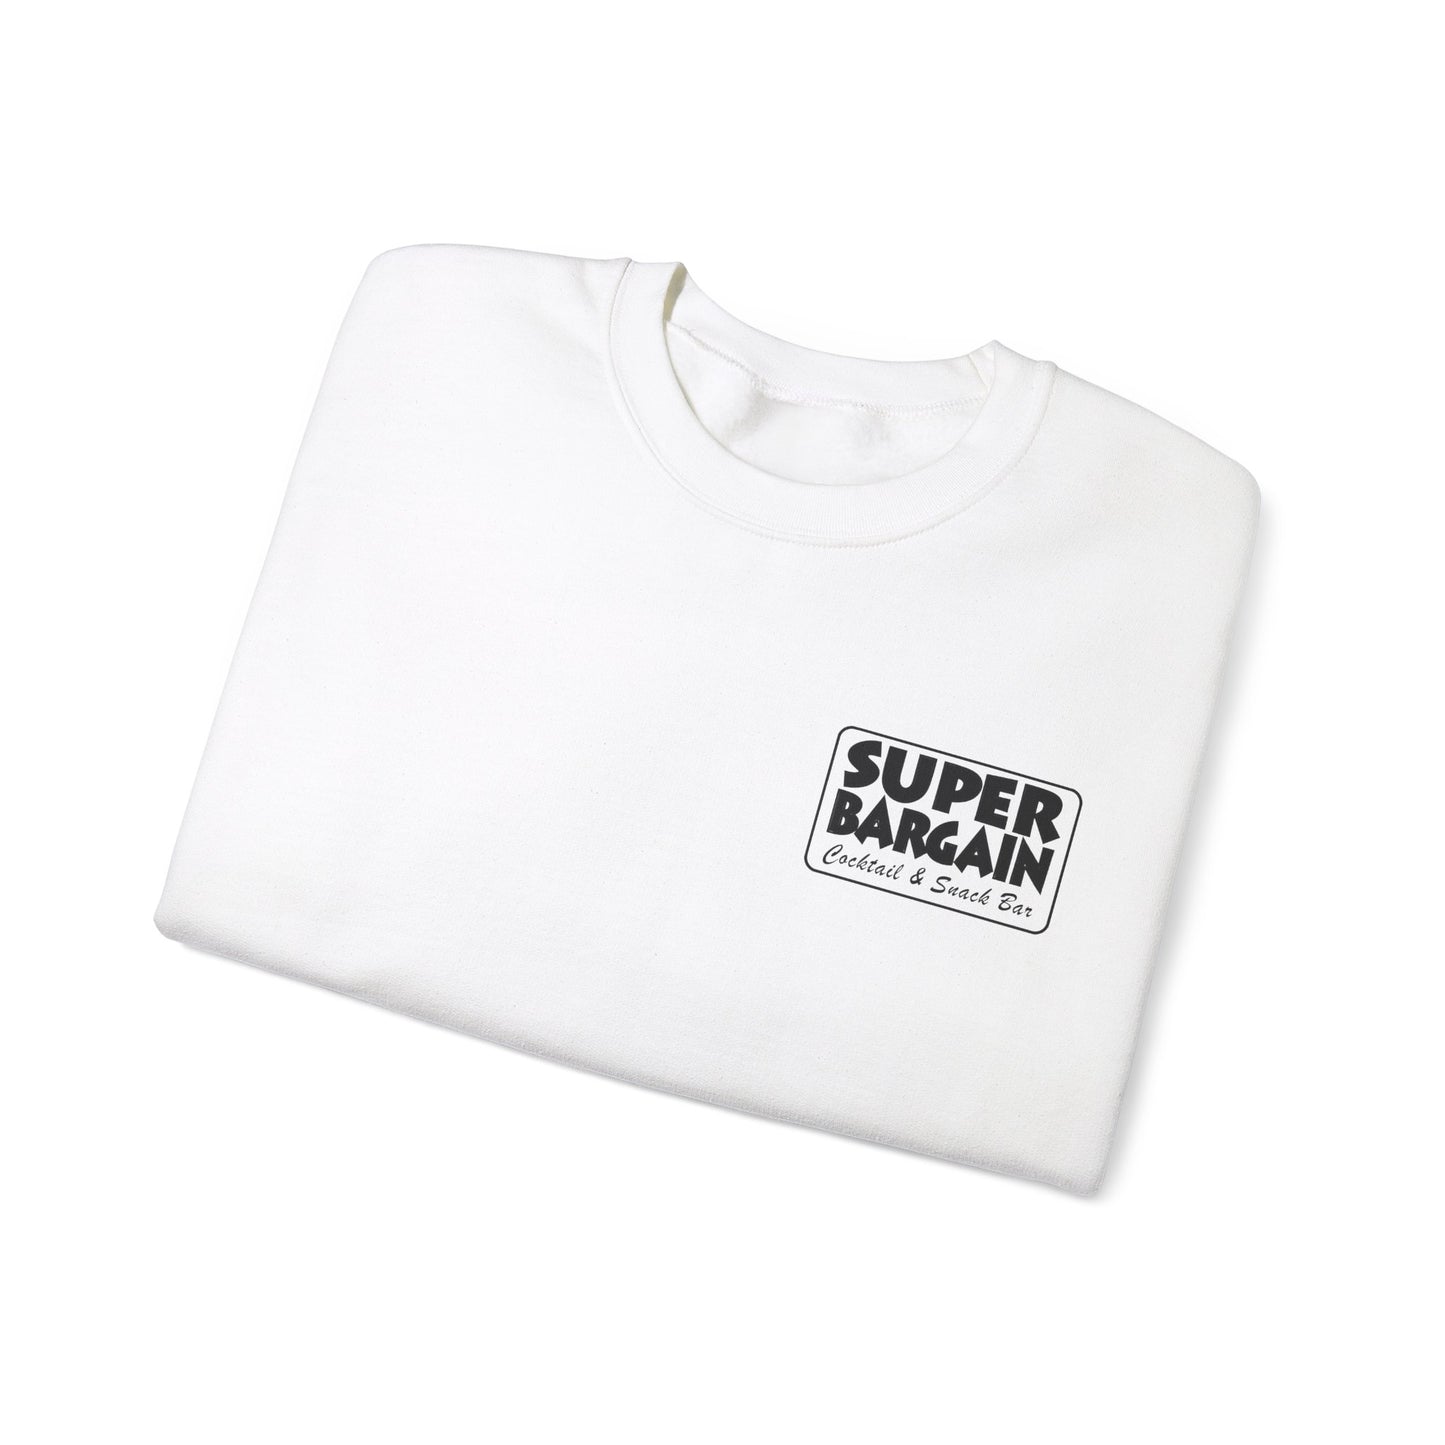 A folded Unisex Heavy Blend™ Crewneck Monochrome Logo and Cabbagetown Sweatshirt by Printify, with a black and white "Super Bargain - Cabbagetown" logo printed on the left chest area, isolated on a white background.